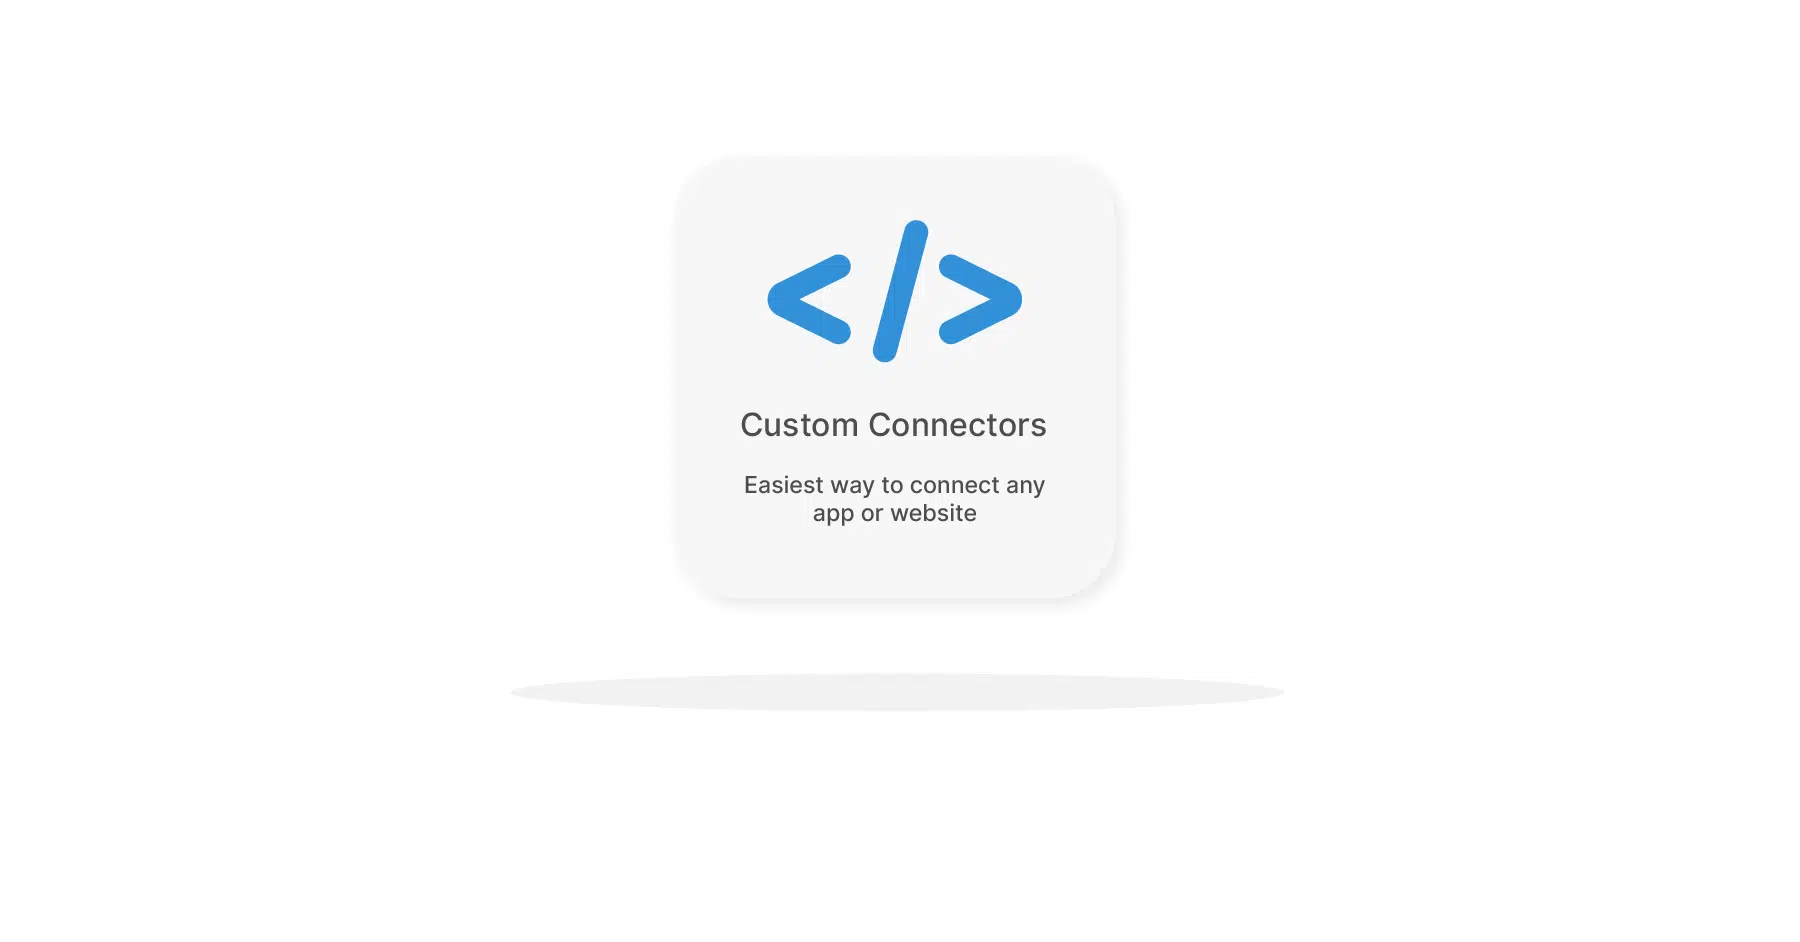 Create custom connectors with Cyclr the easiest way to connect any app or website